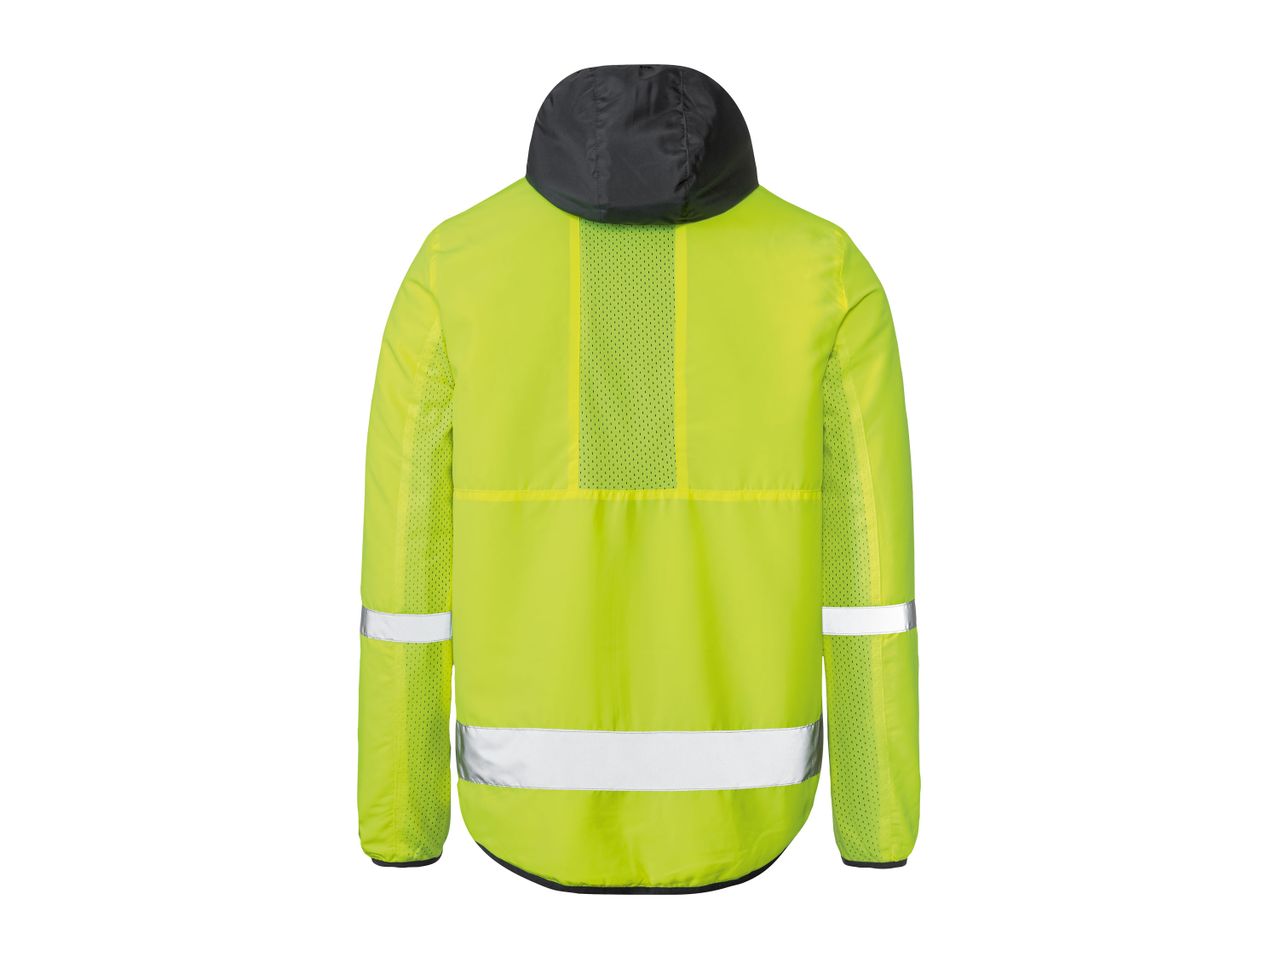 Go to full screen view: Crivit Men’s Reversible Cycling Jacket - Image 6